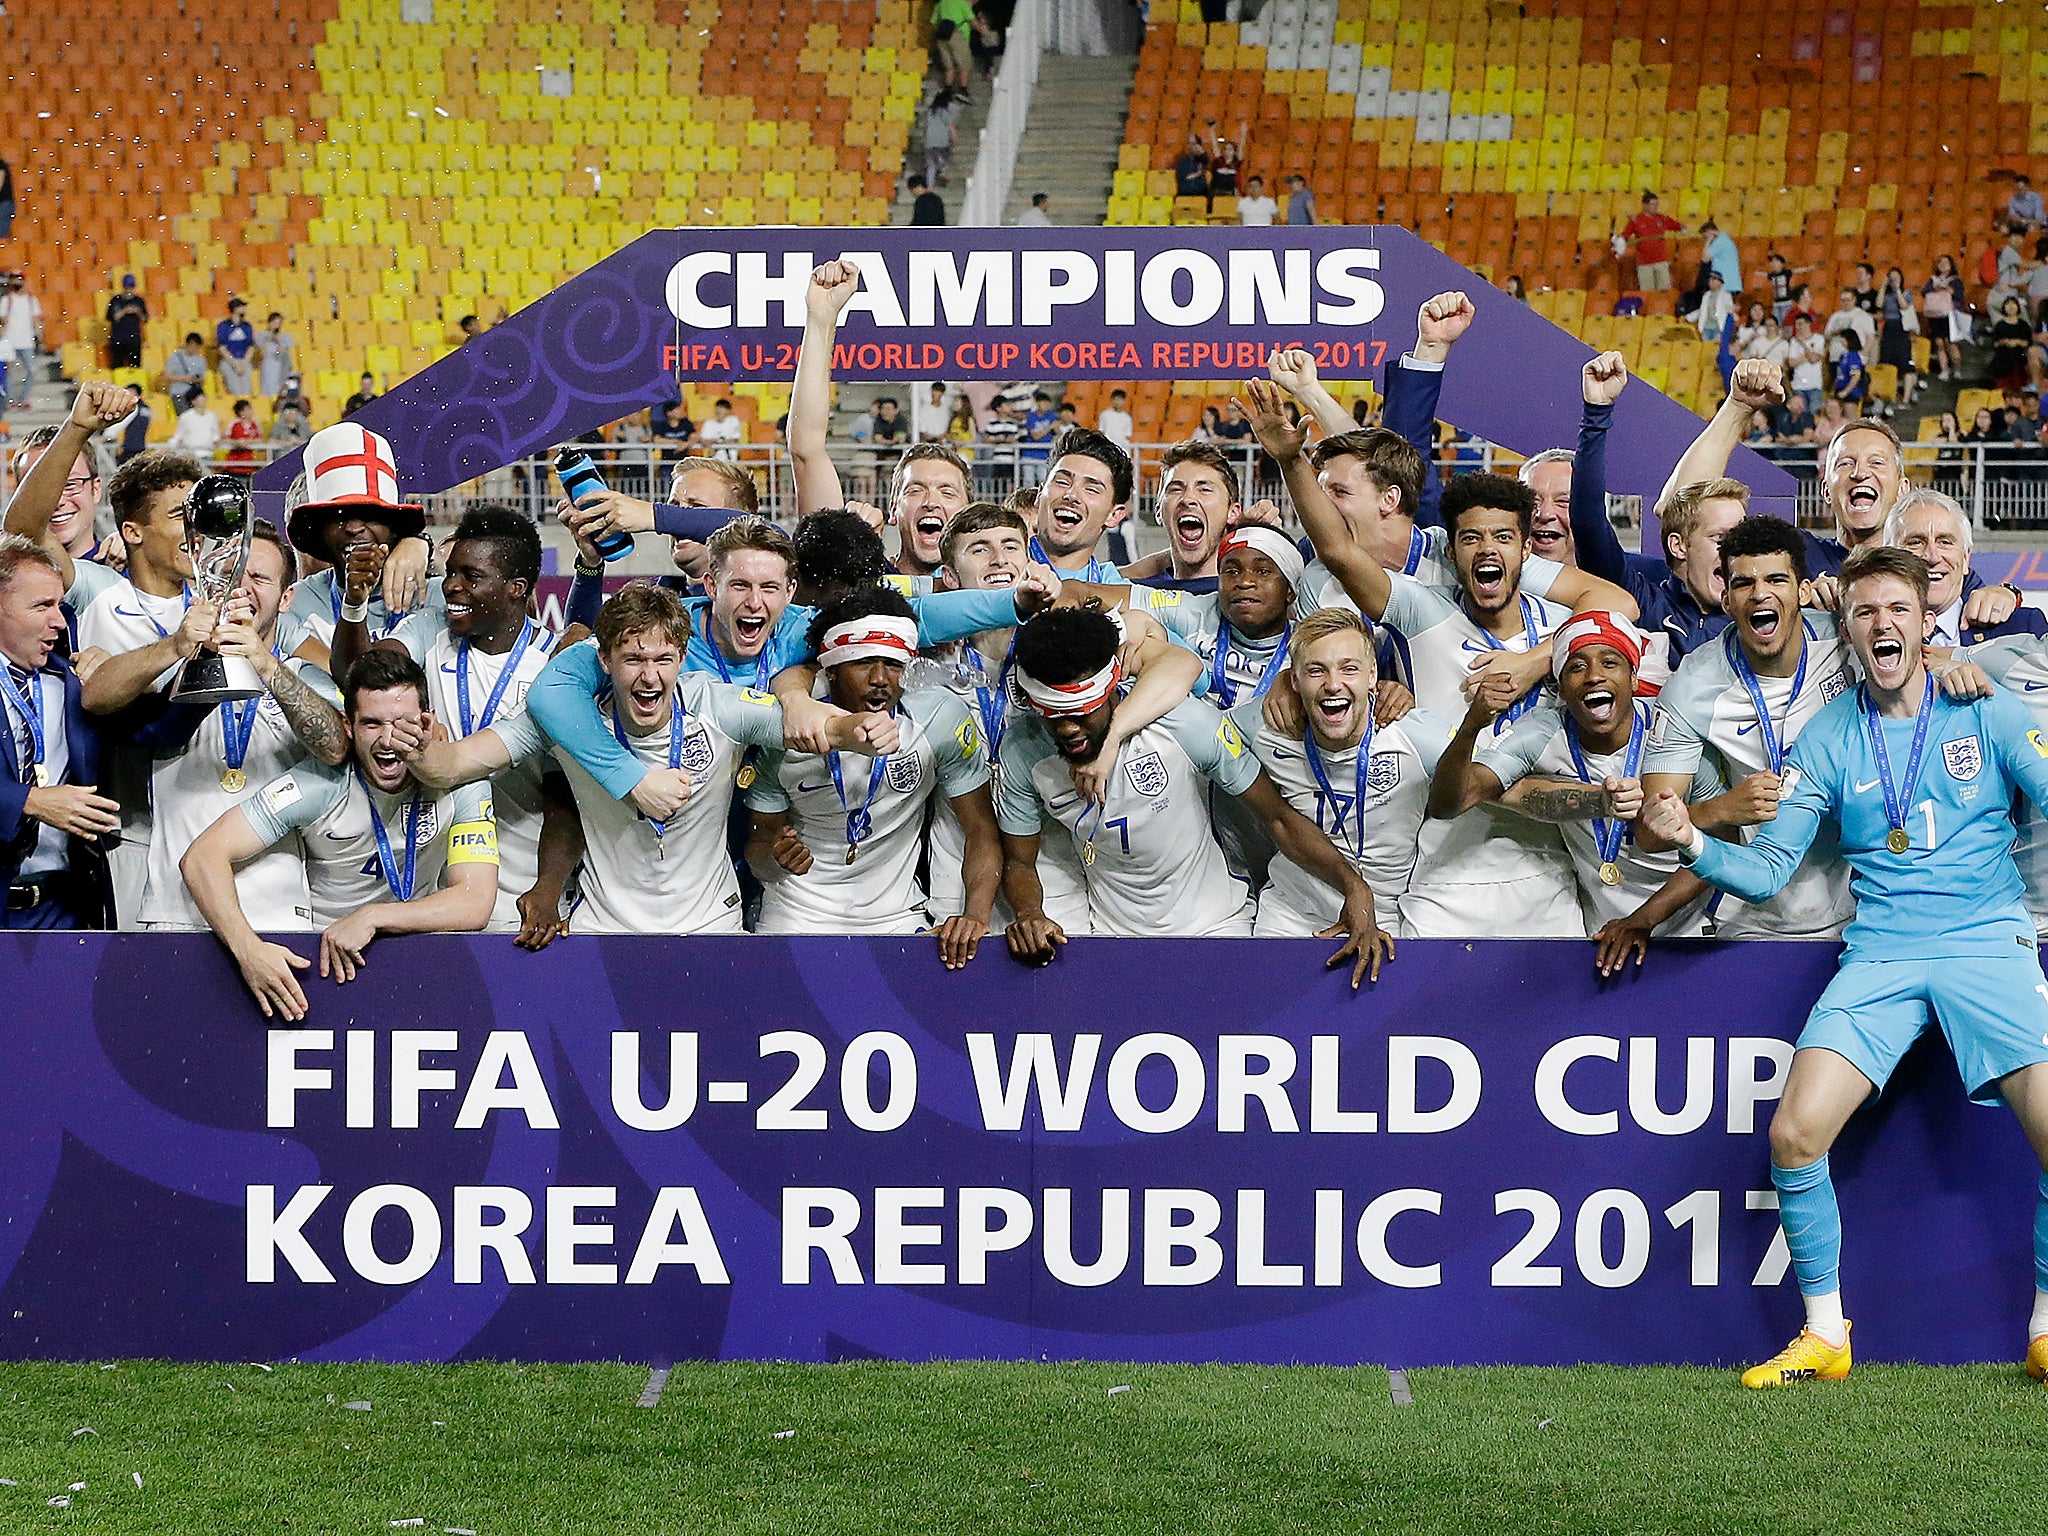 England players celebrate after defeating Venezuela 1-0 to win the final of the FIFA U-20 World Cup Korea 2017 at Suwon World Cup Stadium in Suwon, South Korea